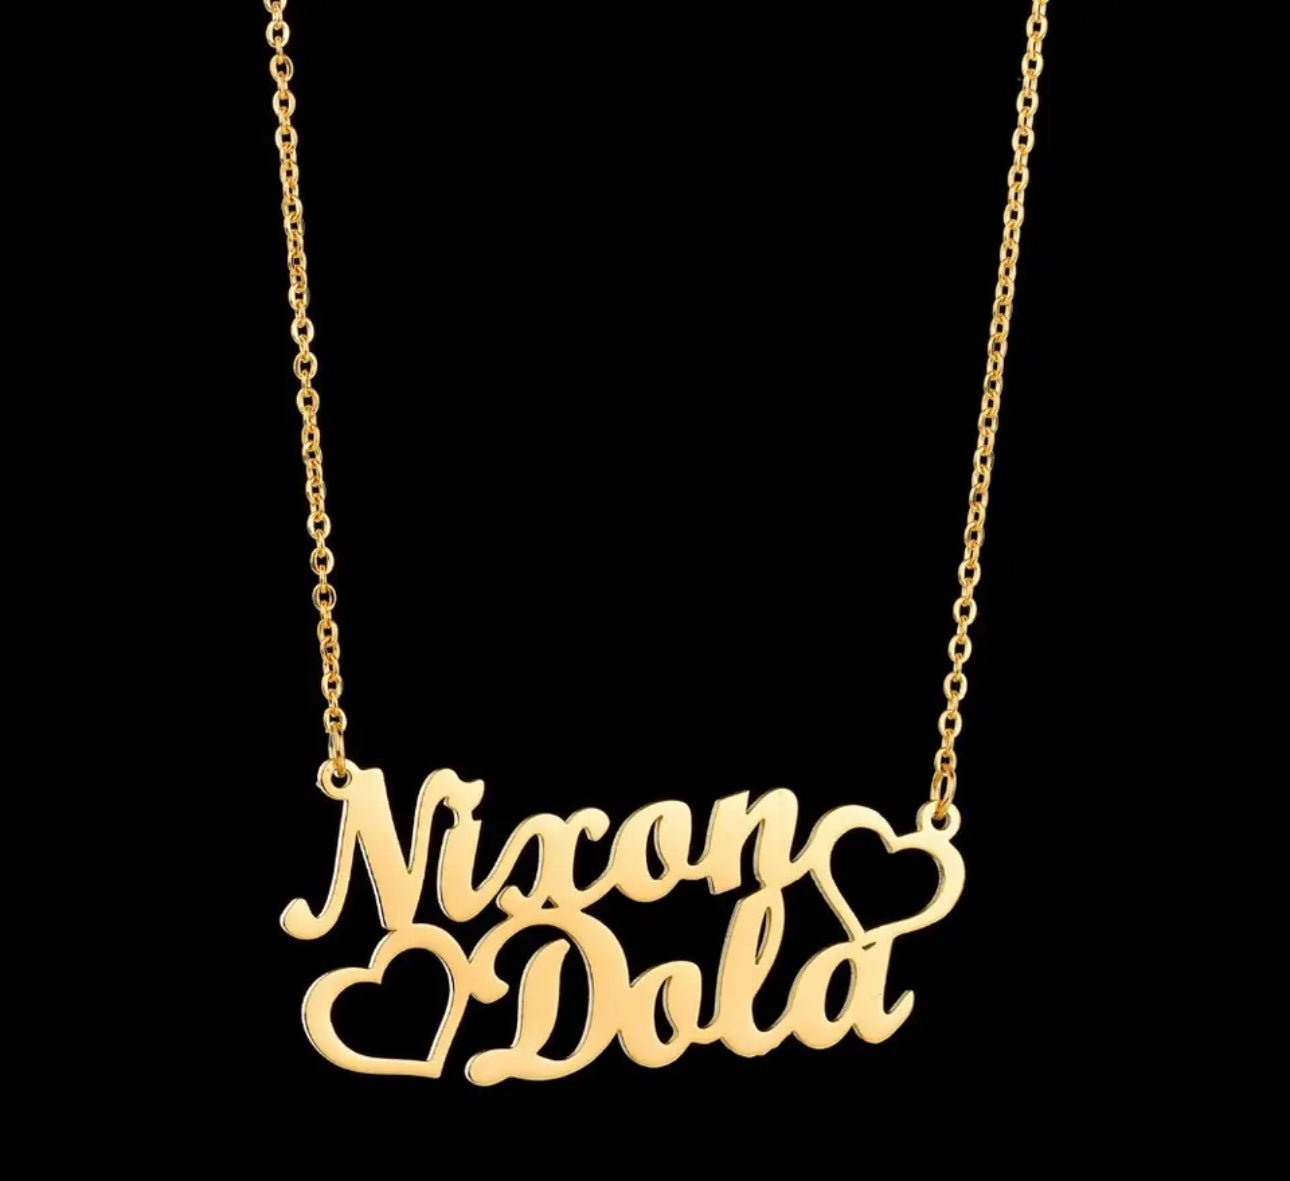 Personalized stainless name necklace